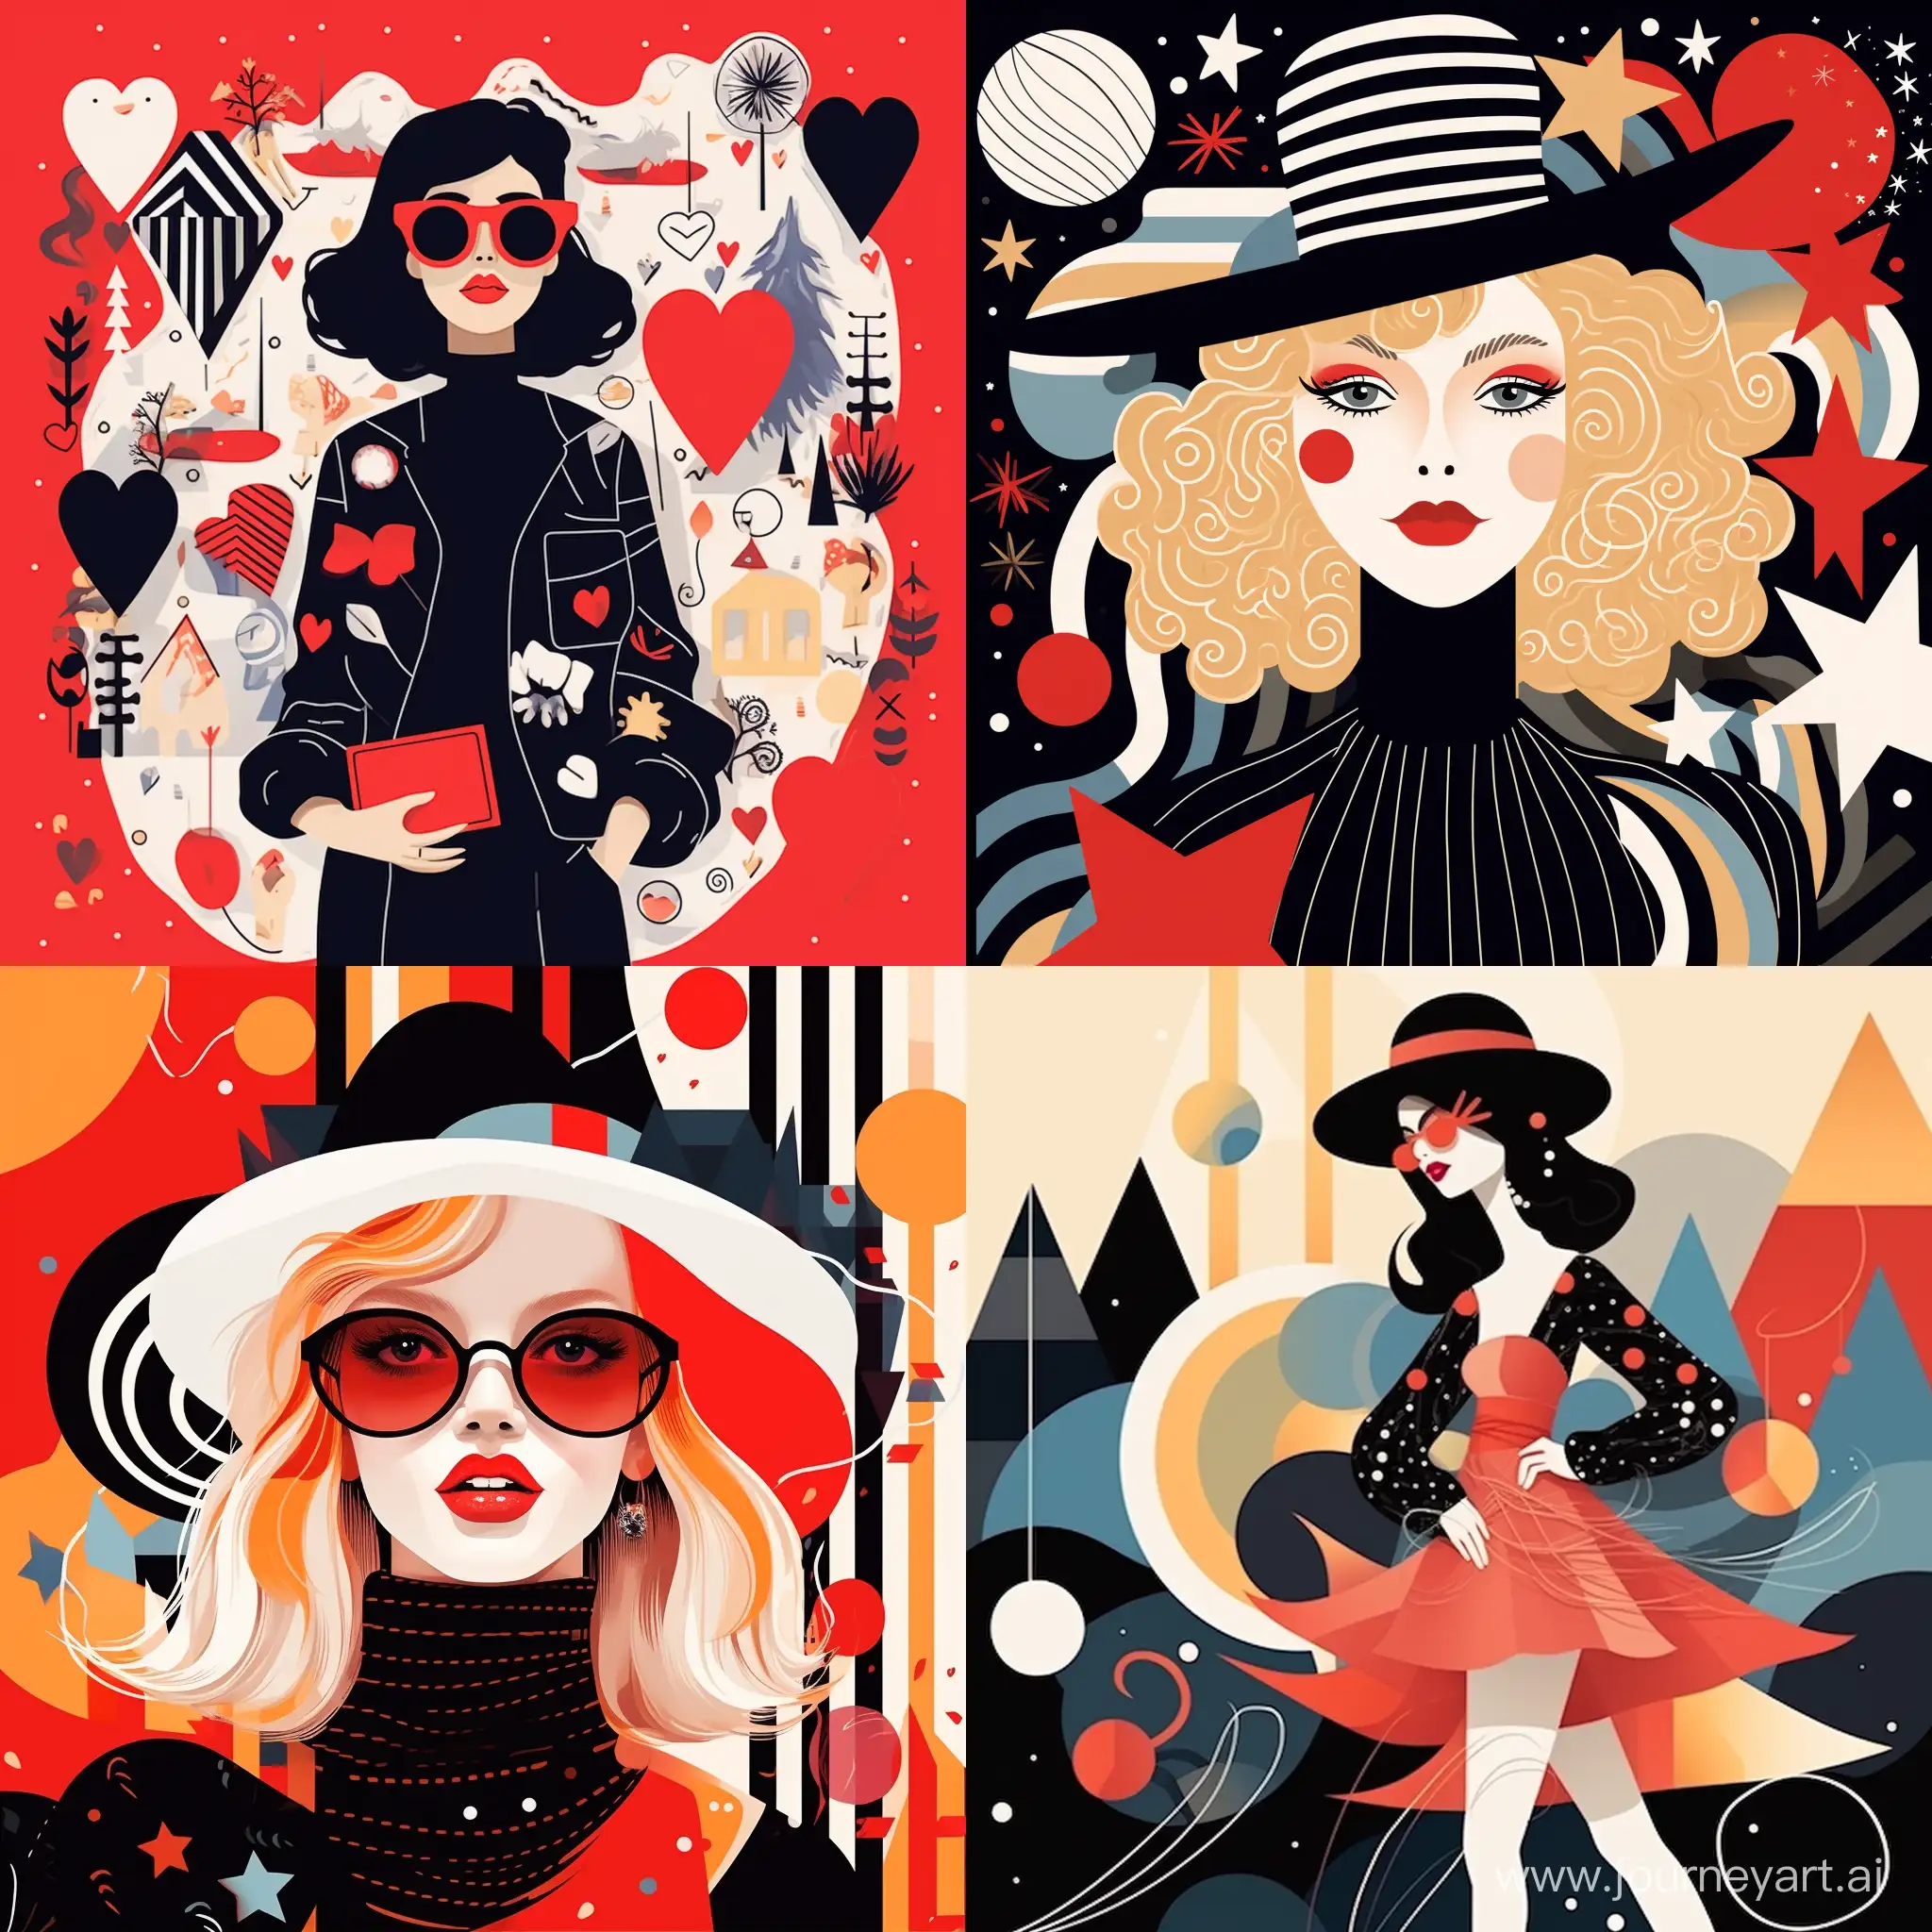 Charming-Christmas-Character-Illustration-with-Fashion-Textures